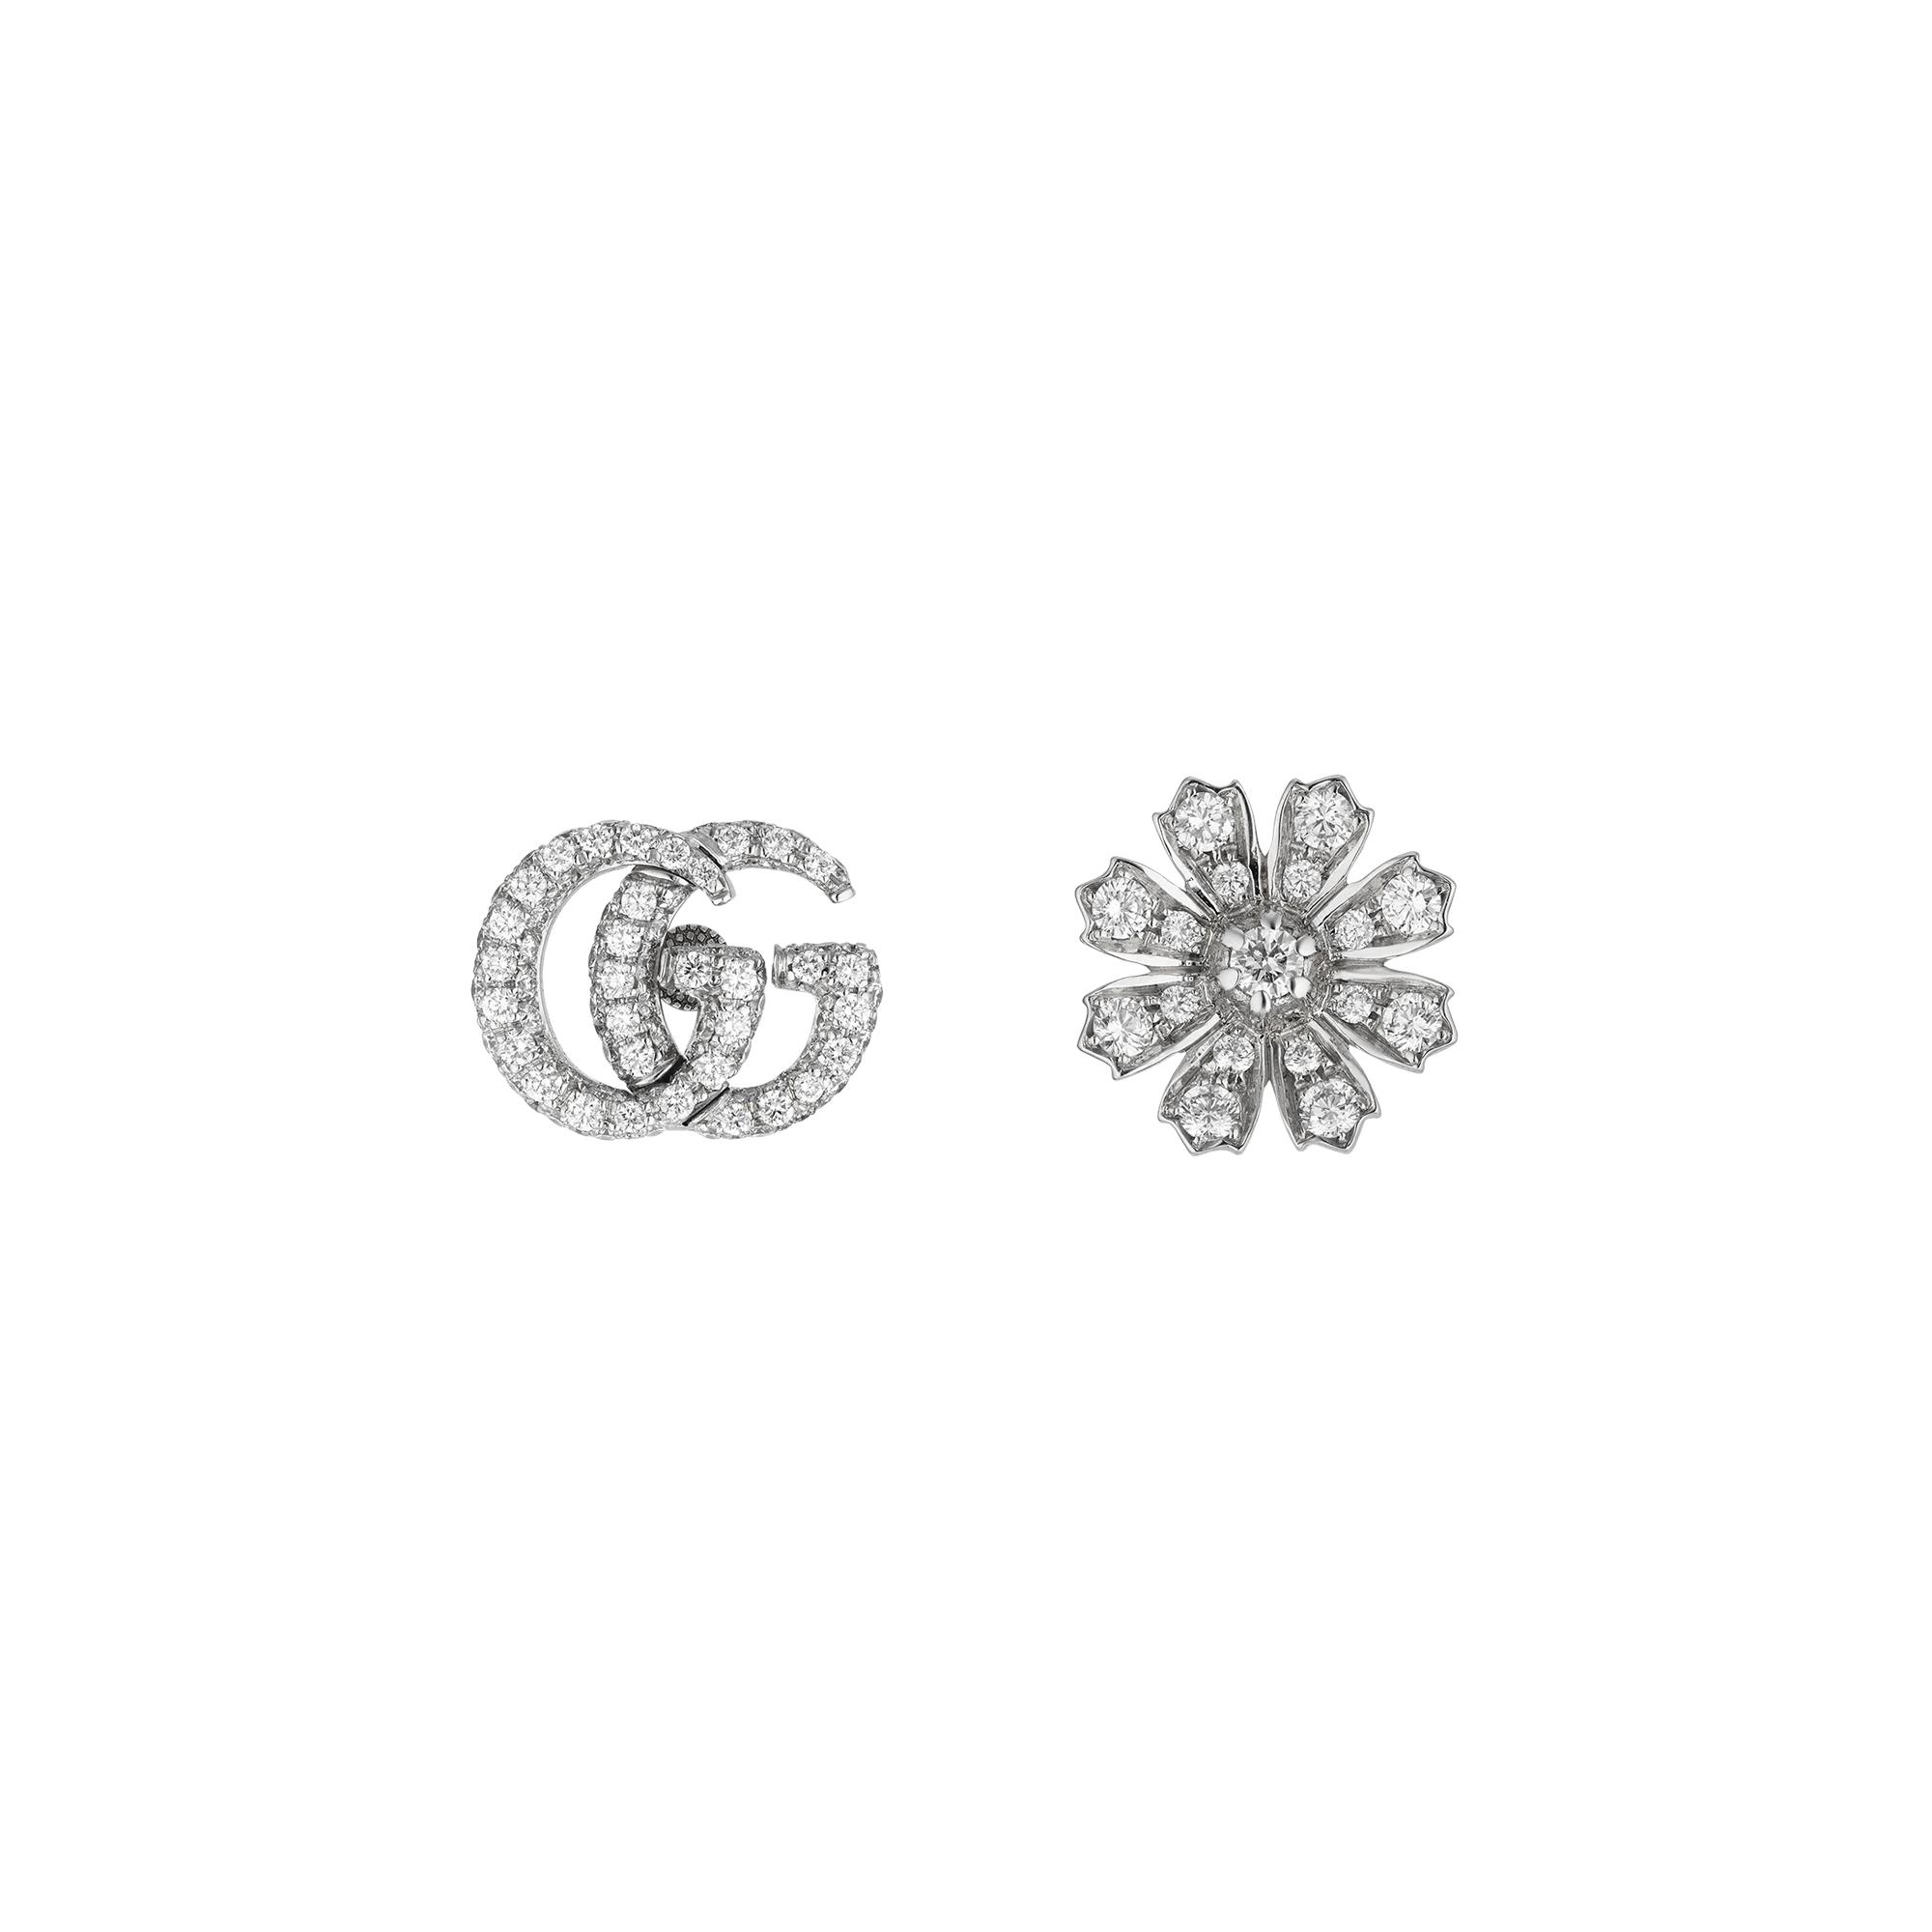 Gucci GG Running White Gold Diamond Pavé Stud Earrings 110ctw  REEDS  Jewelers